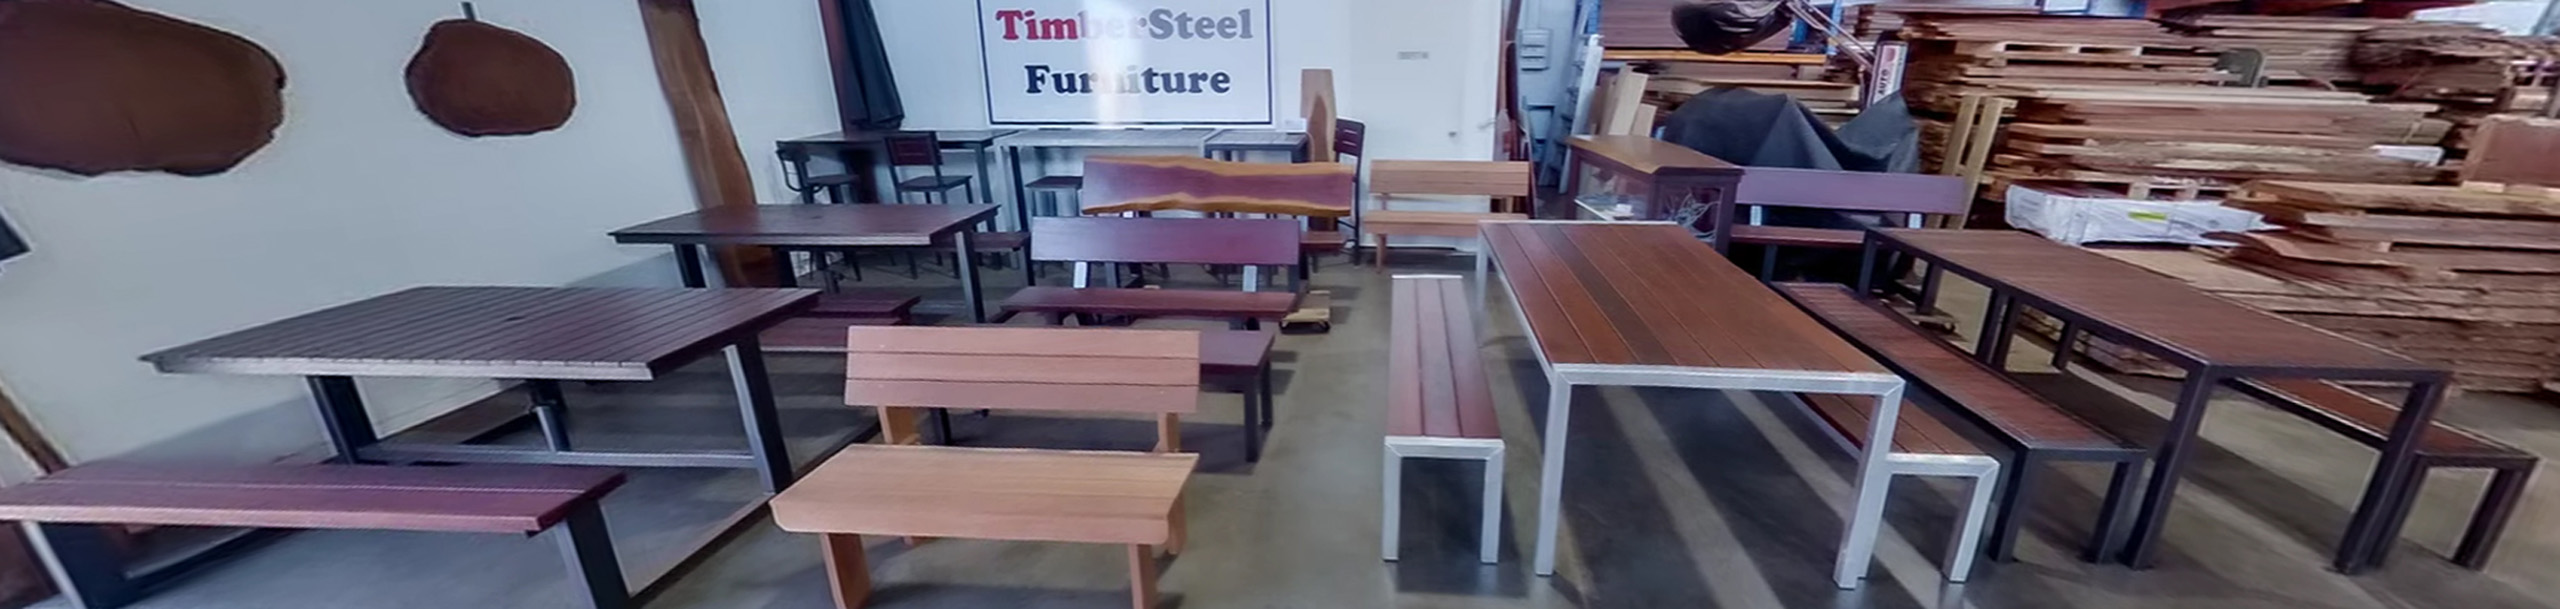 View inside timbersteel furniture workshop with furniture on display